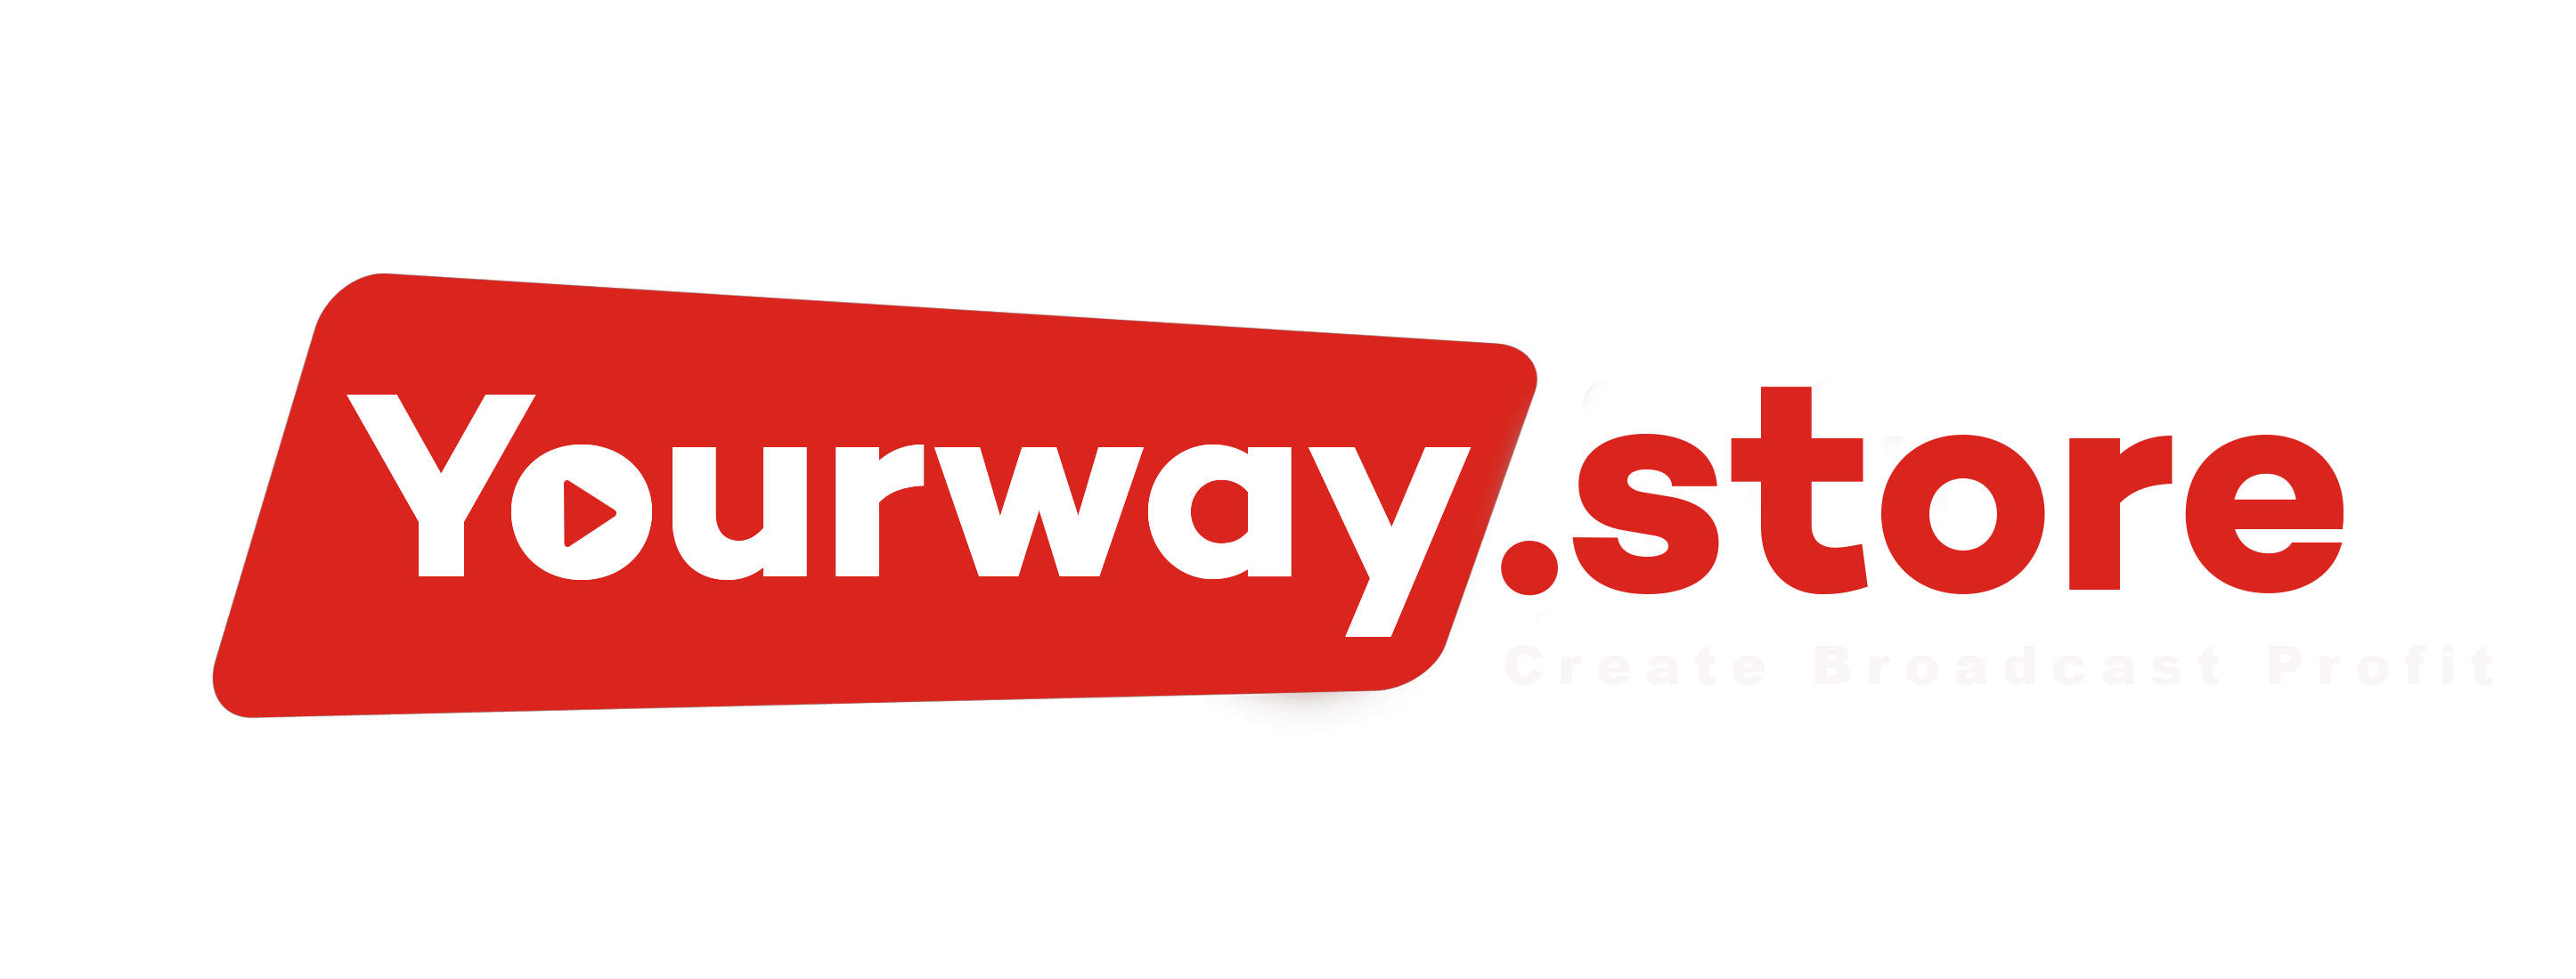 YourWay.Store – Interactive Digital Platform for Creators and Audiences